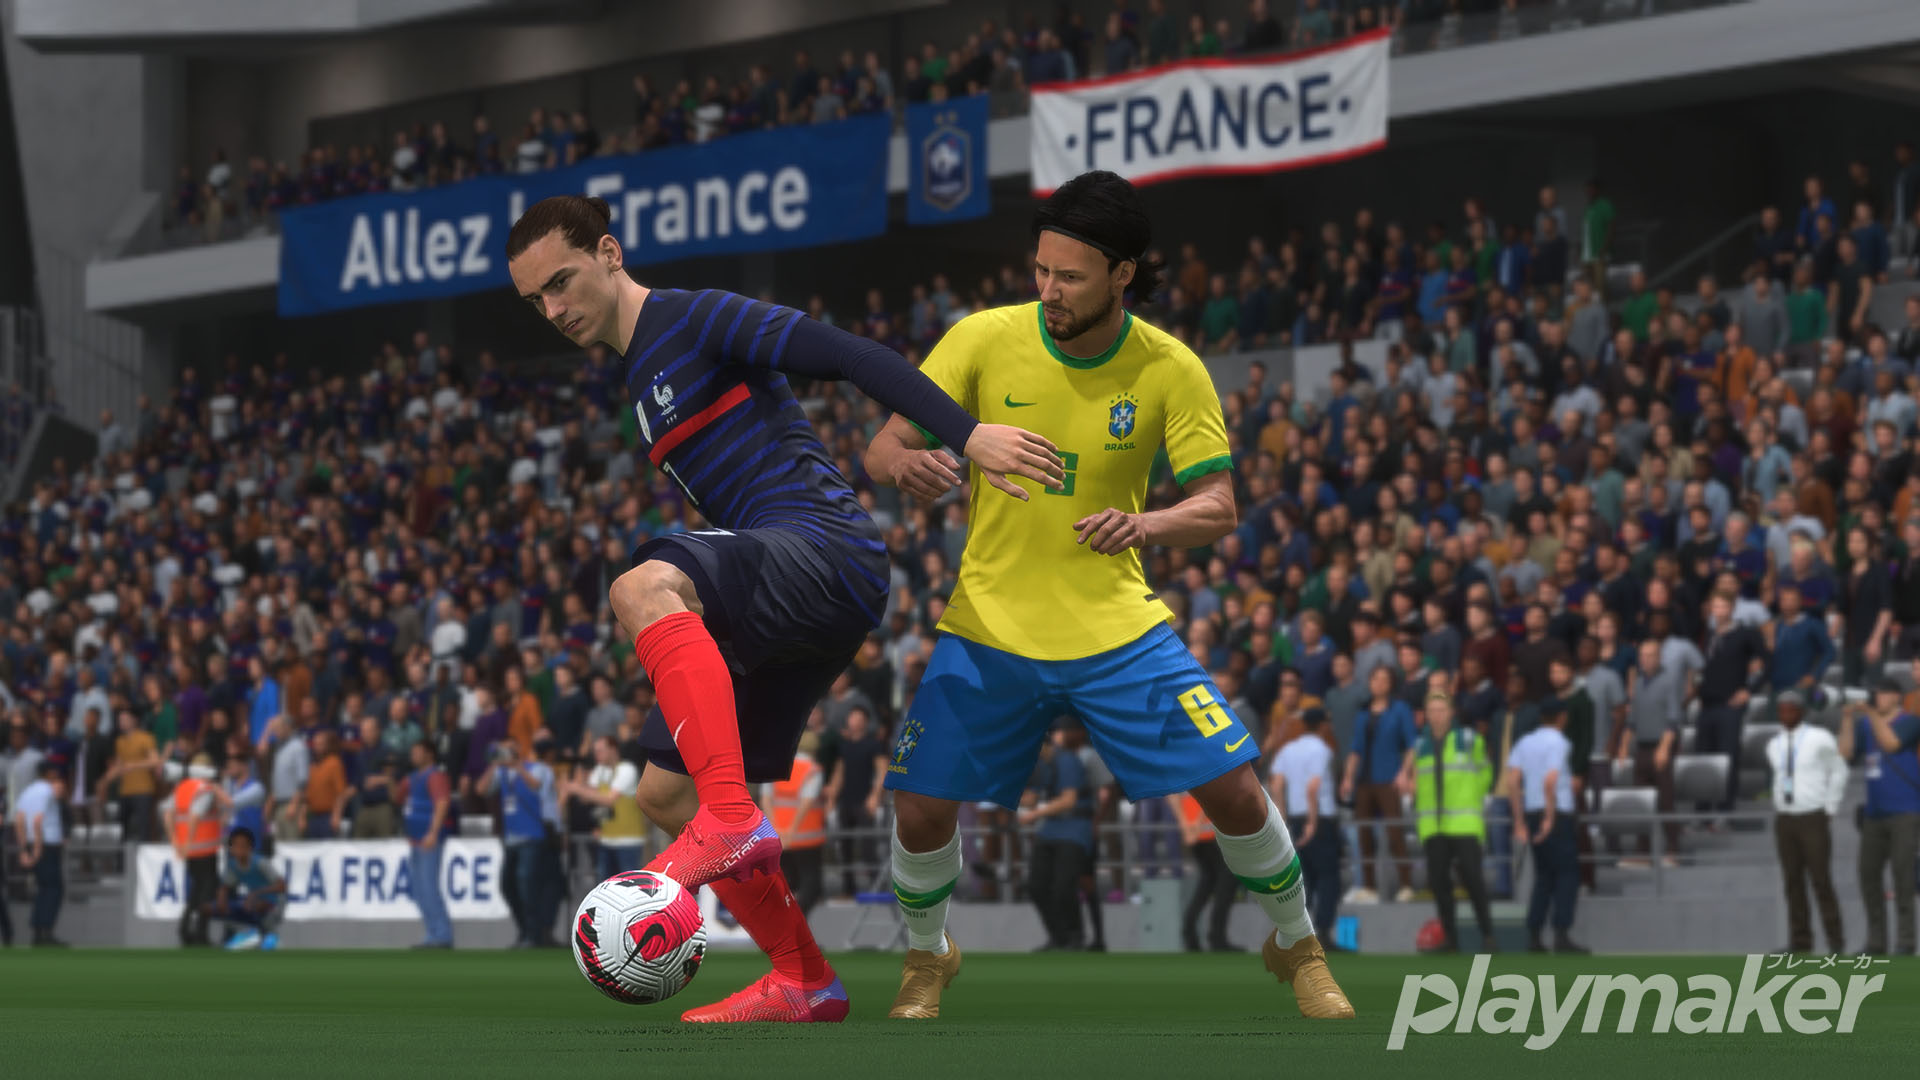 EA Sports FC launches new brand as football video game embarks on